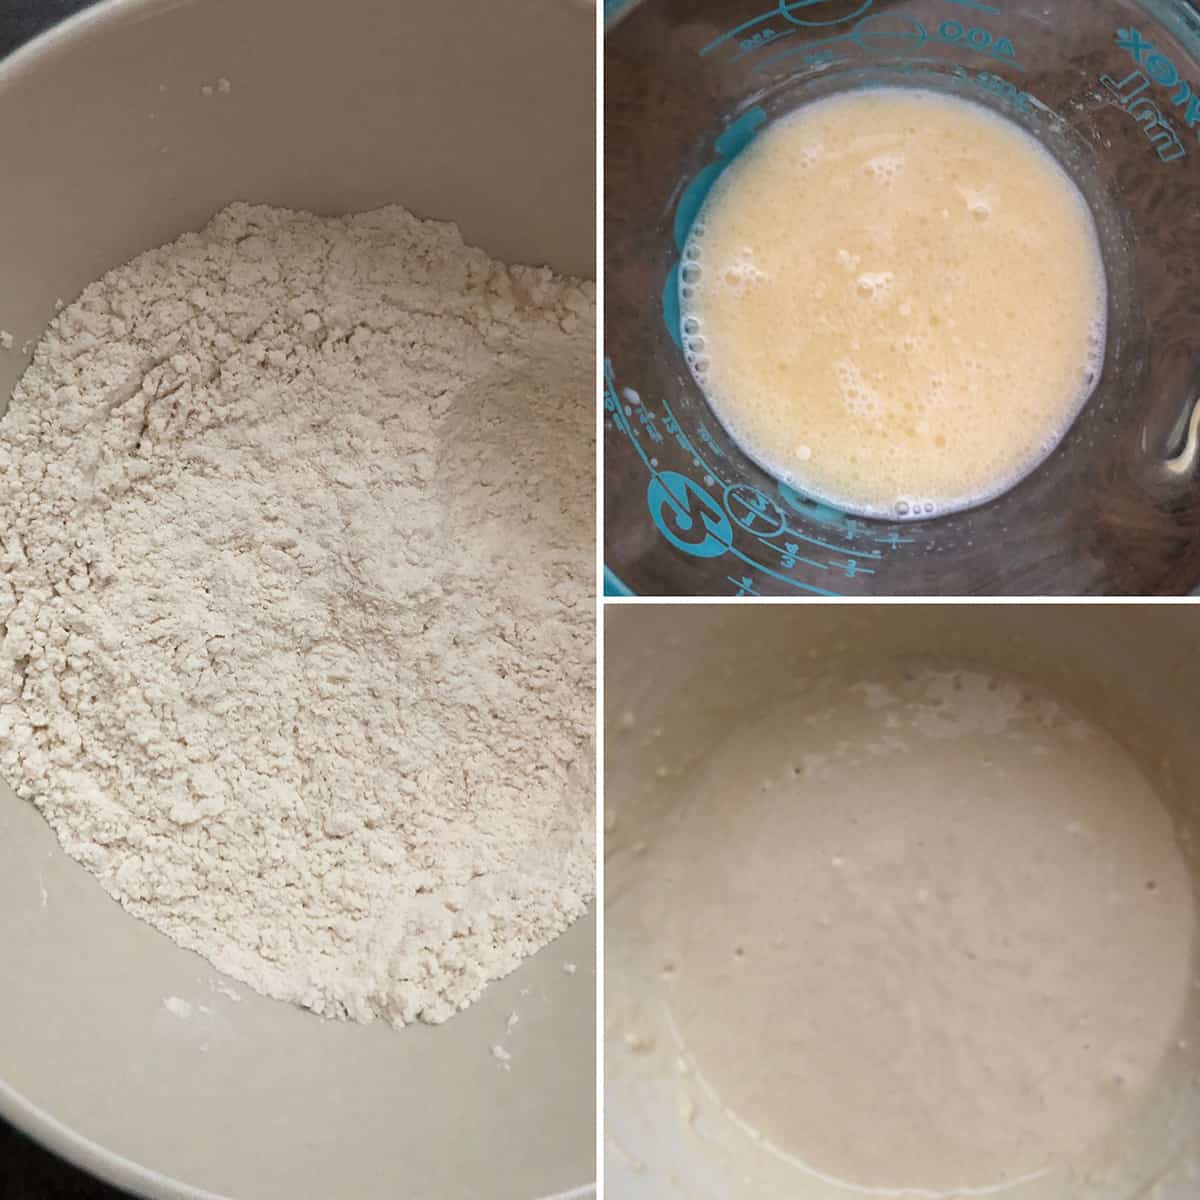 Dry ingredients in a bowl, wet ingredients in a measuring cup, both combined in a bowl